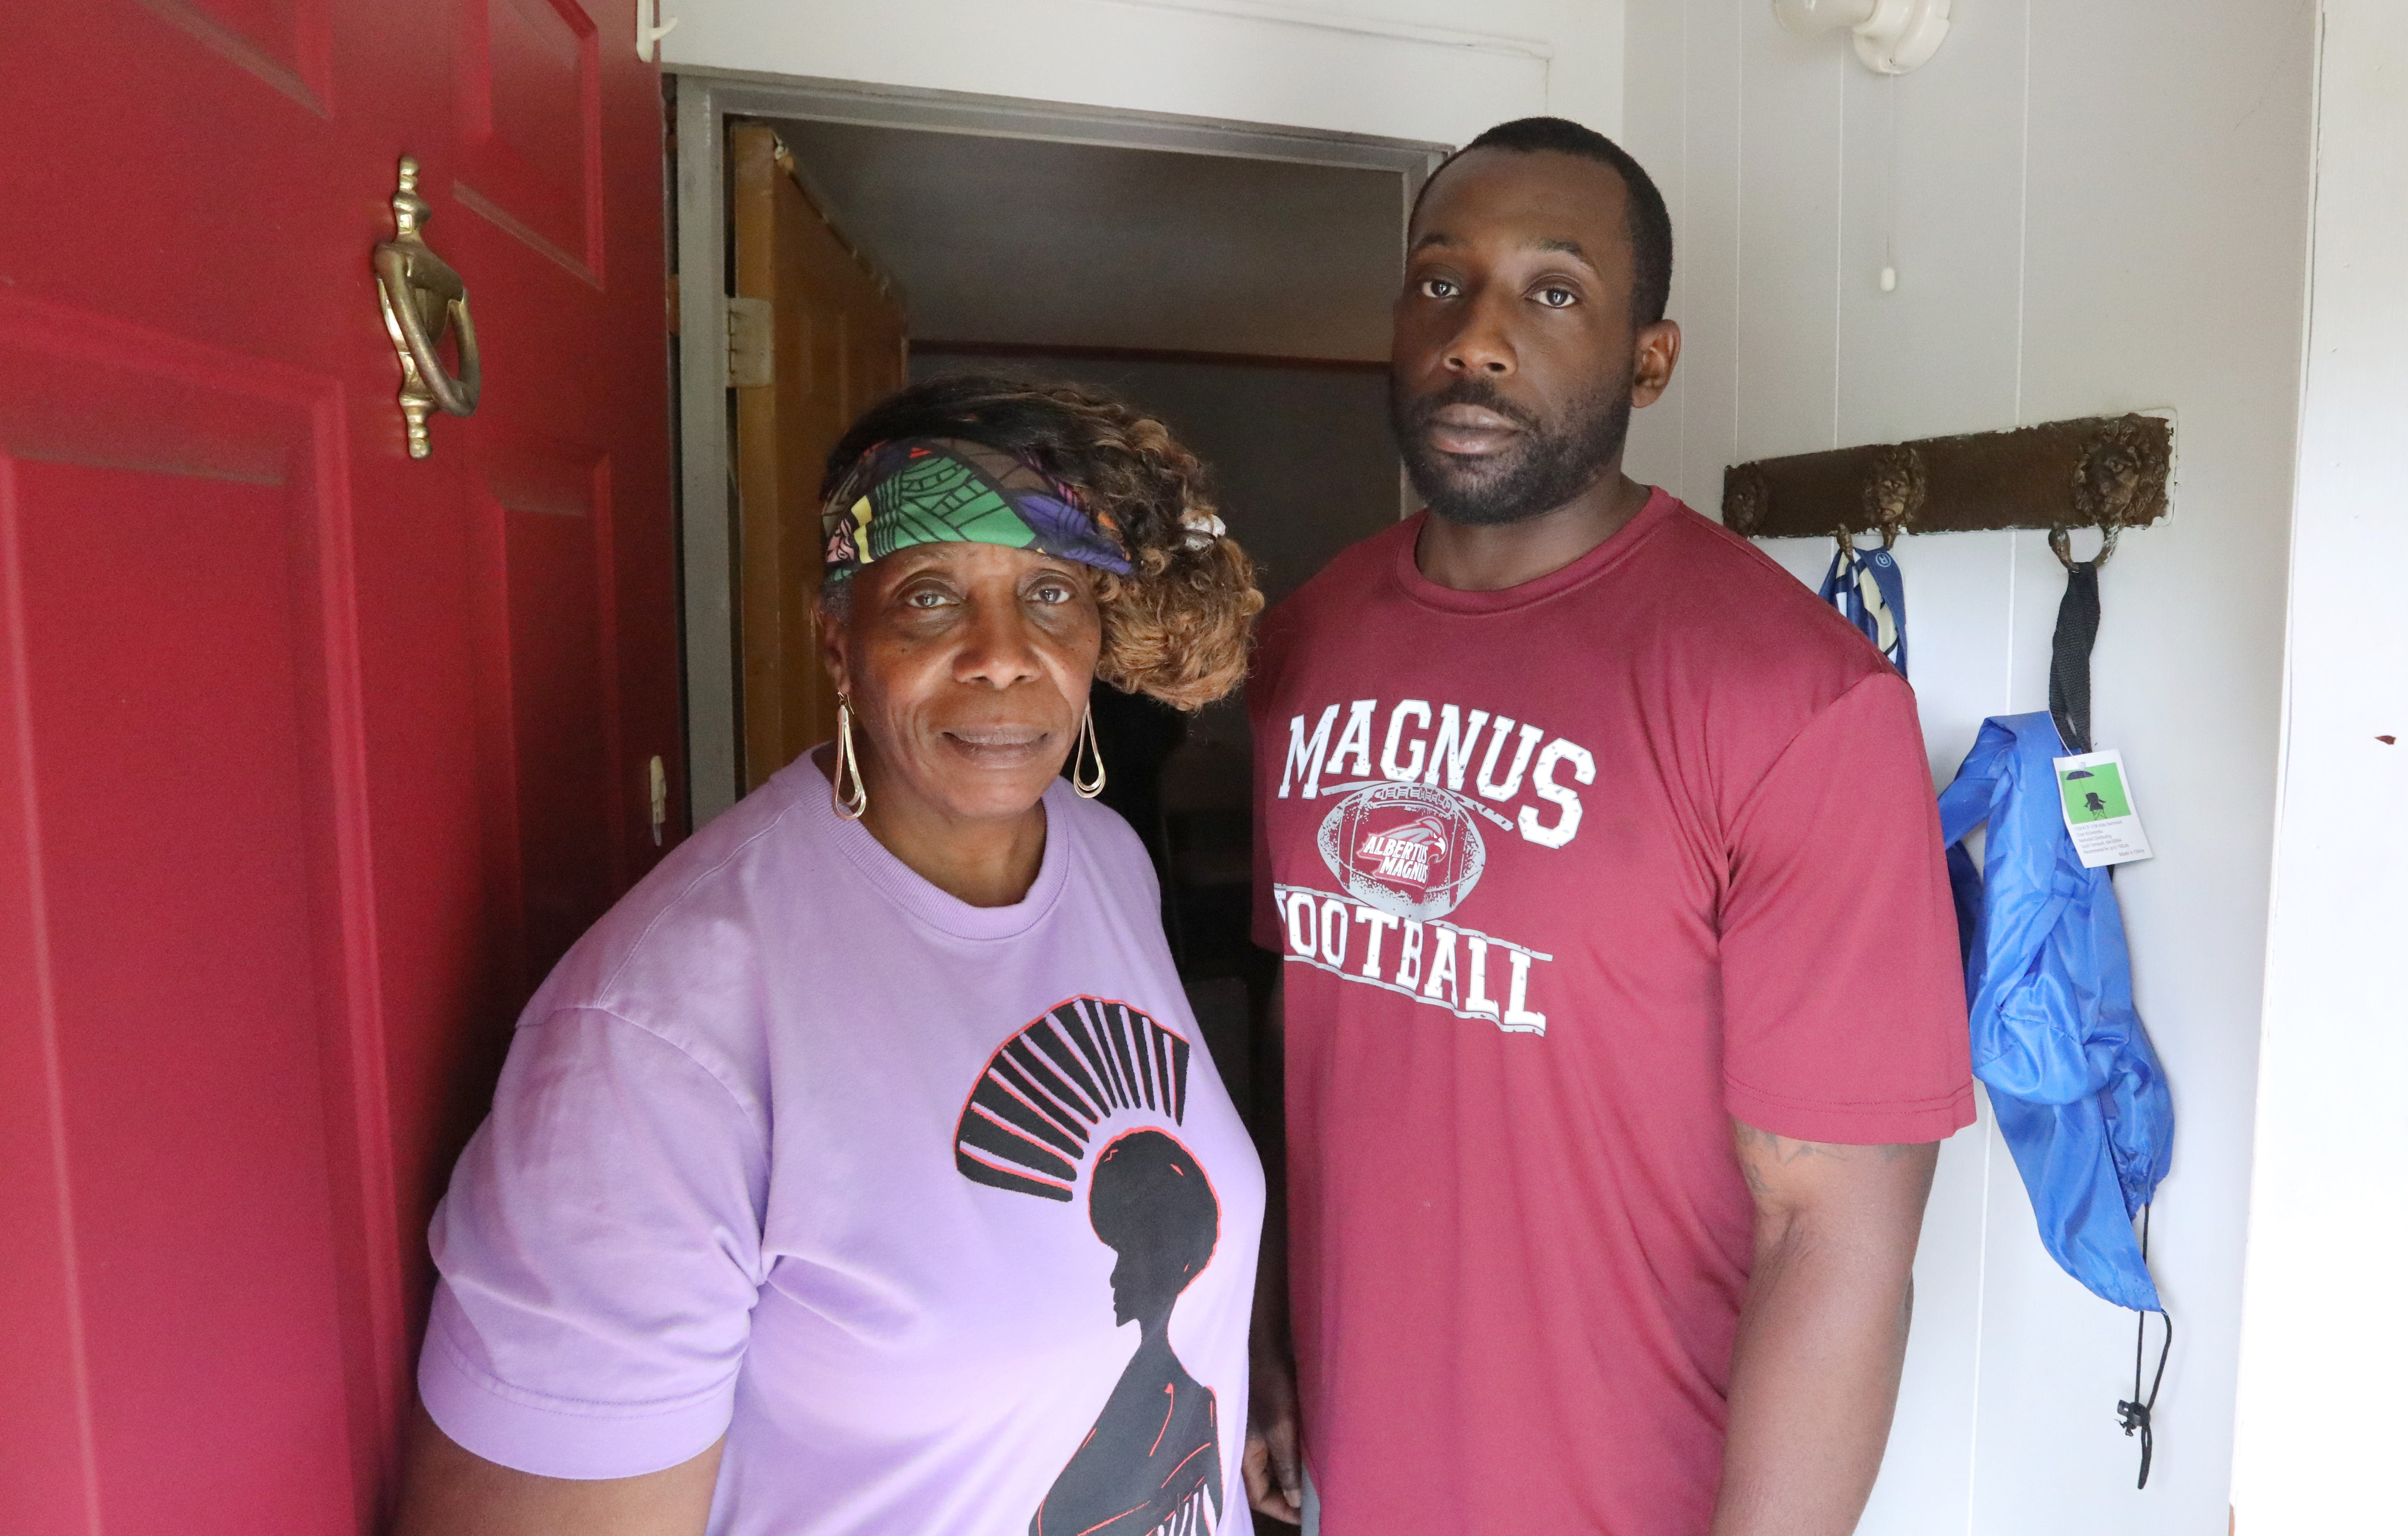 Sean Harris' family files civil rights suit against Clarkstown, police over standoff death